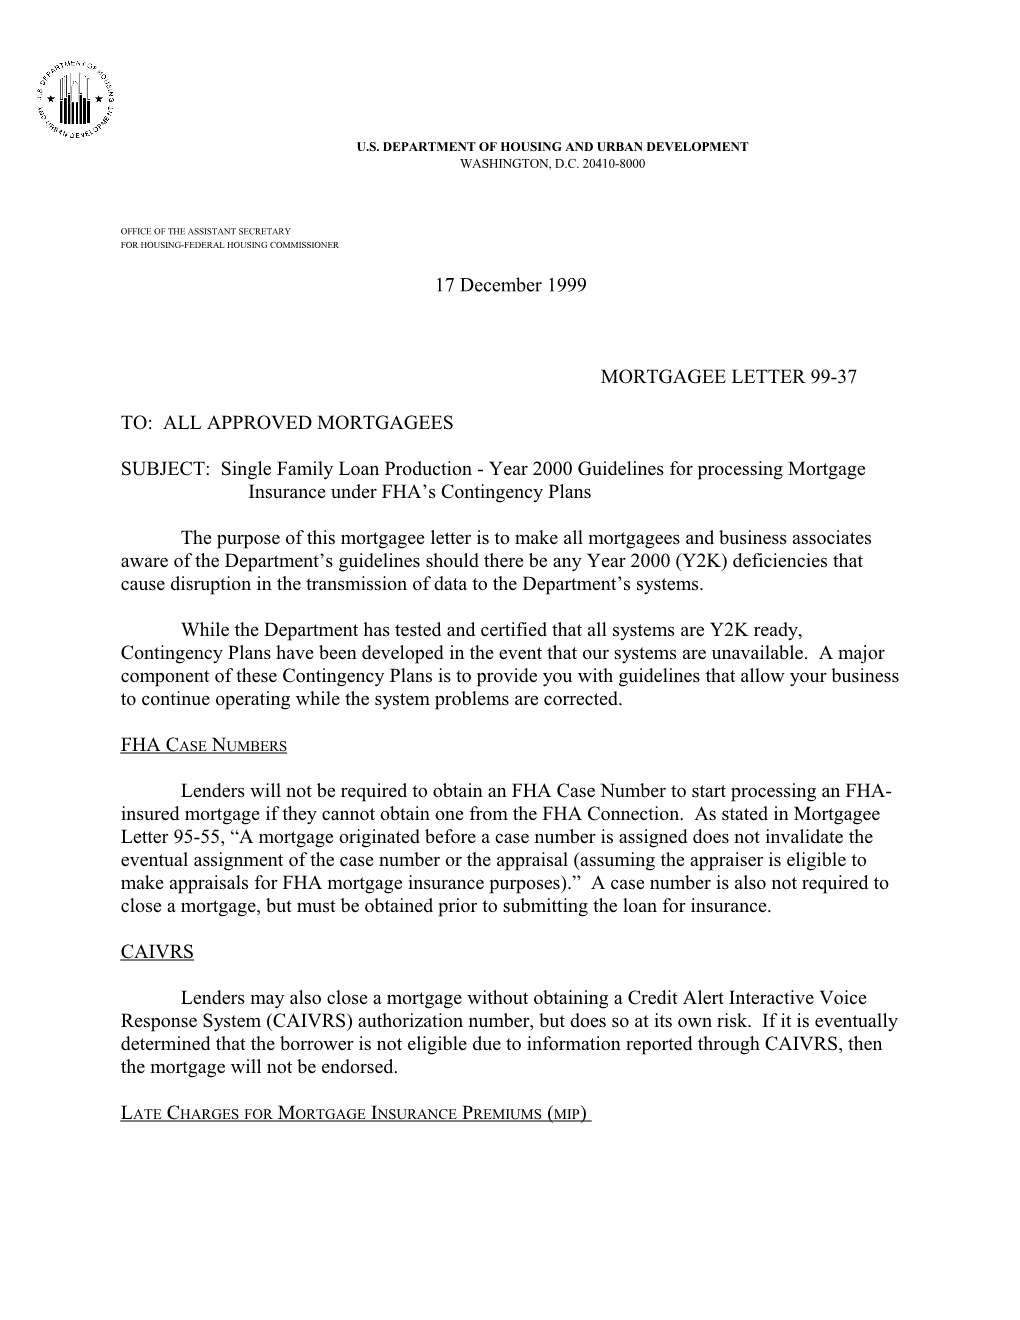 Mortgagee Letter 99-37